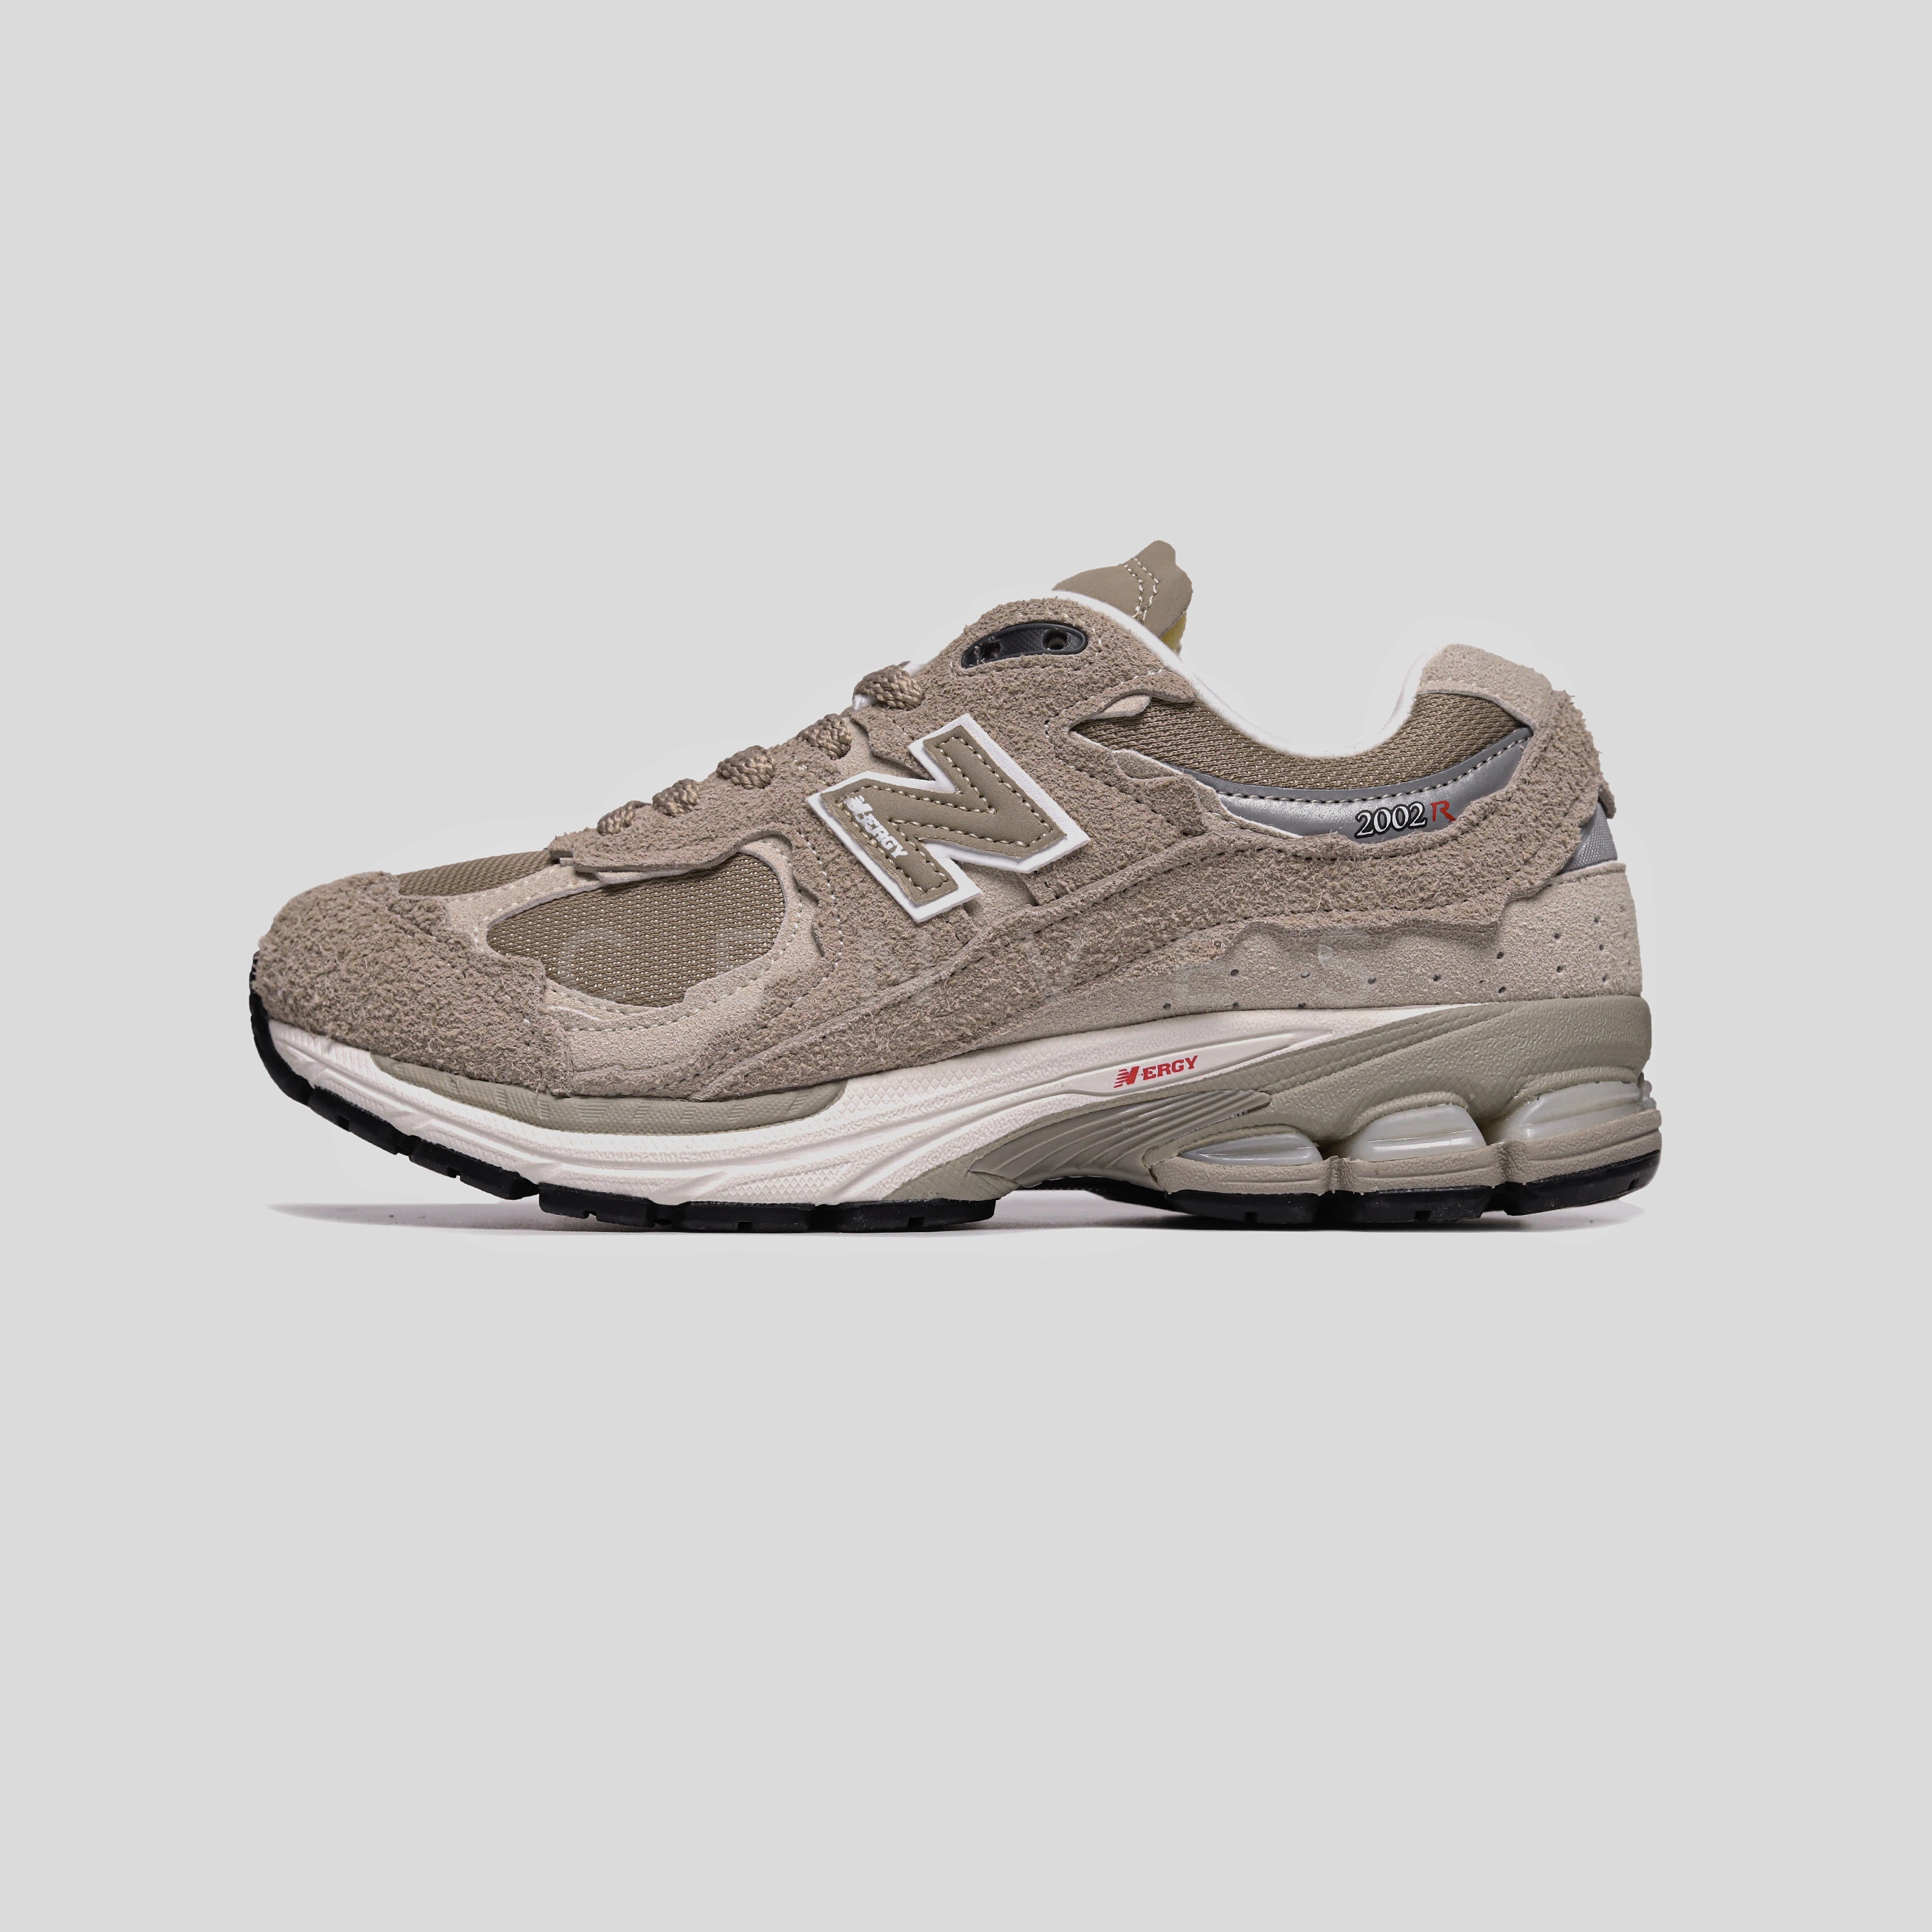 New Balance 2002R  Protection Pack - Driftwood